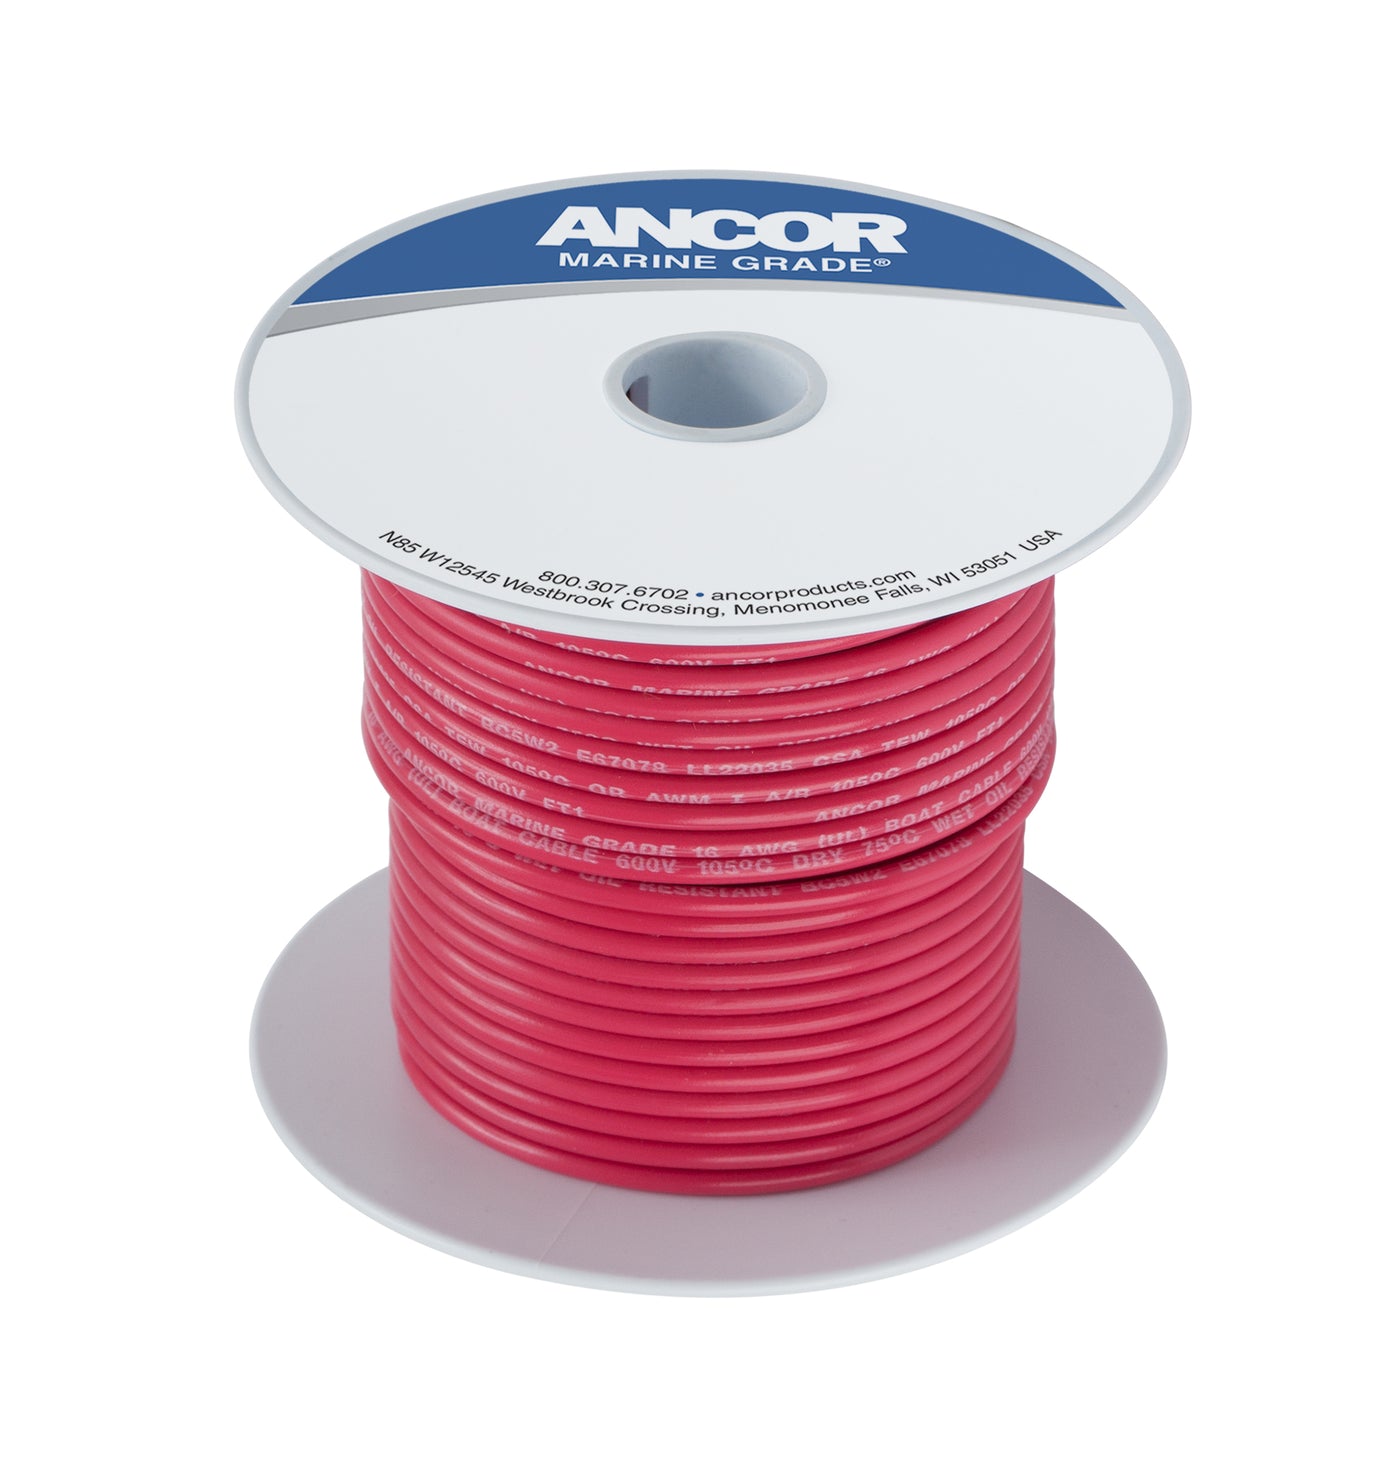 Ancor 112525 Tinned Copper Wire, 6 AWG (13mm²), Red - 250ft